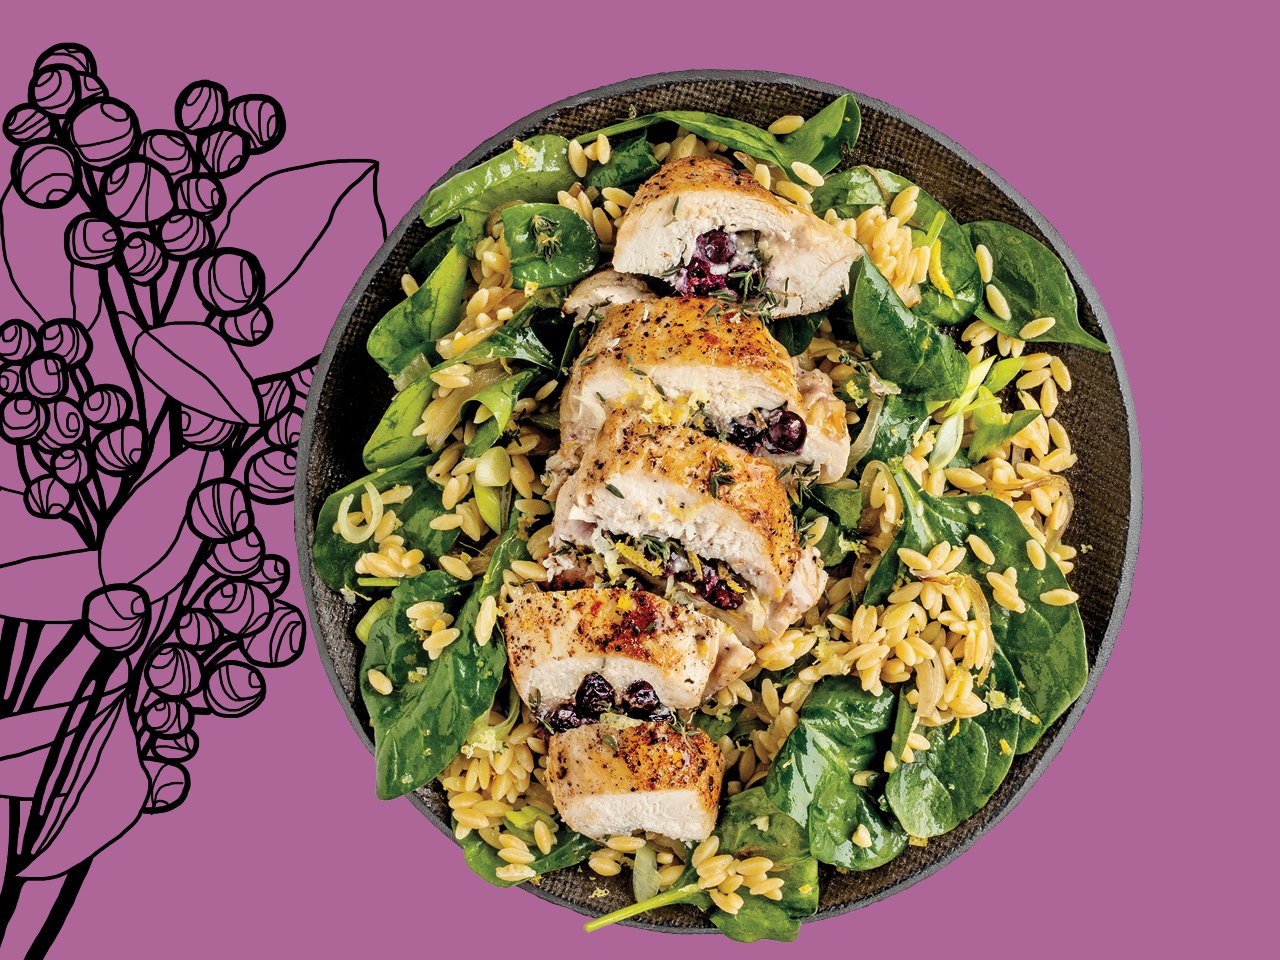 Saskatoon Berry And Brie Stuffed Chicken Breast Over Orzo Spinach Salad